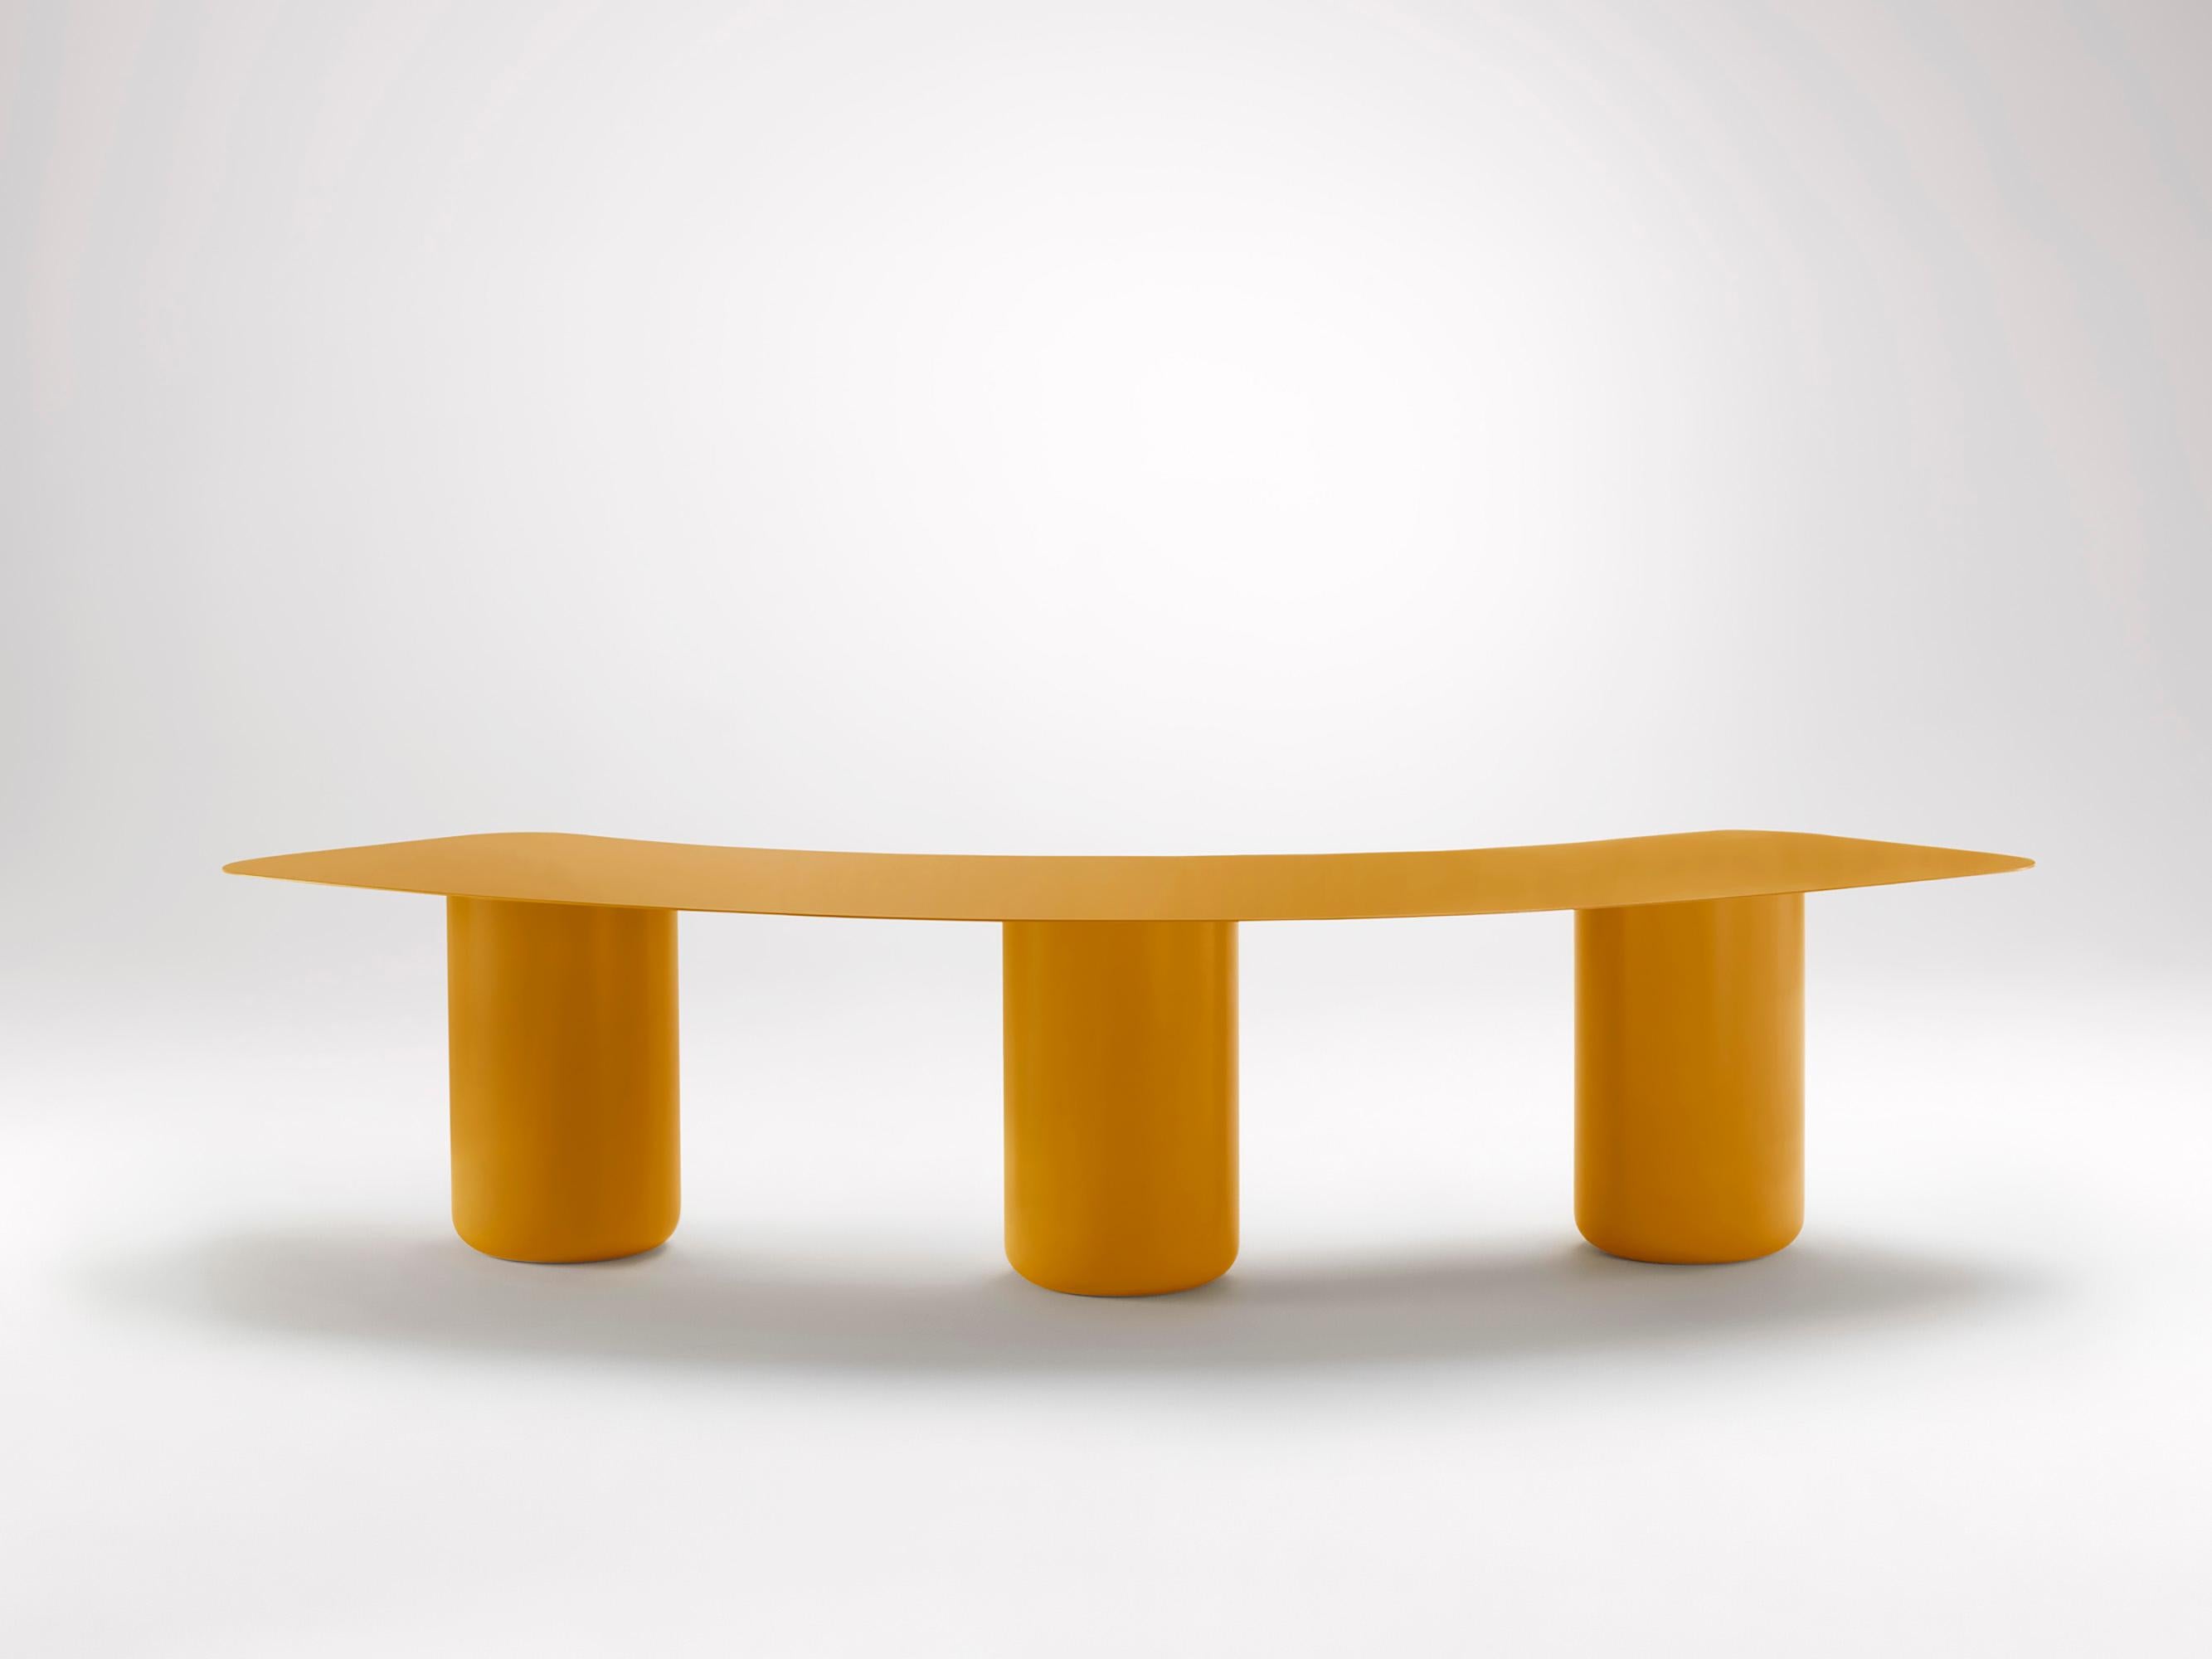 Small Sunshine Yellow Curved Bench by Coco Flip
Dimensions: D 65 x W 165 x H 42 cm
Materials: Mild steel, powder-coated with zinc undercoat. 
Weight: 42 kg

Coco Flip is a Melbourne based furniture and lighting design studio, run by us, Kate Stokes